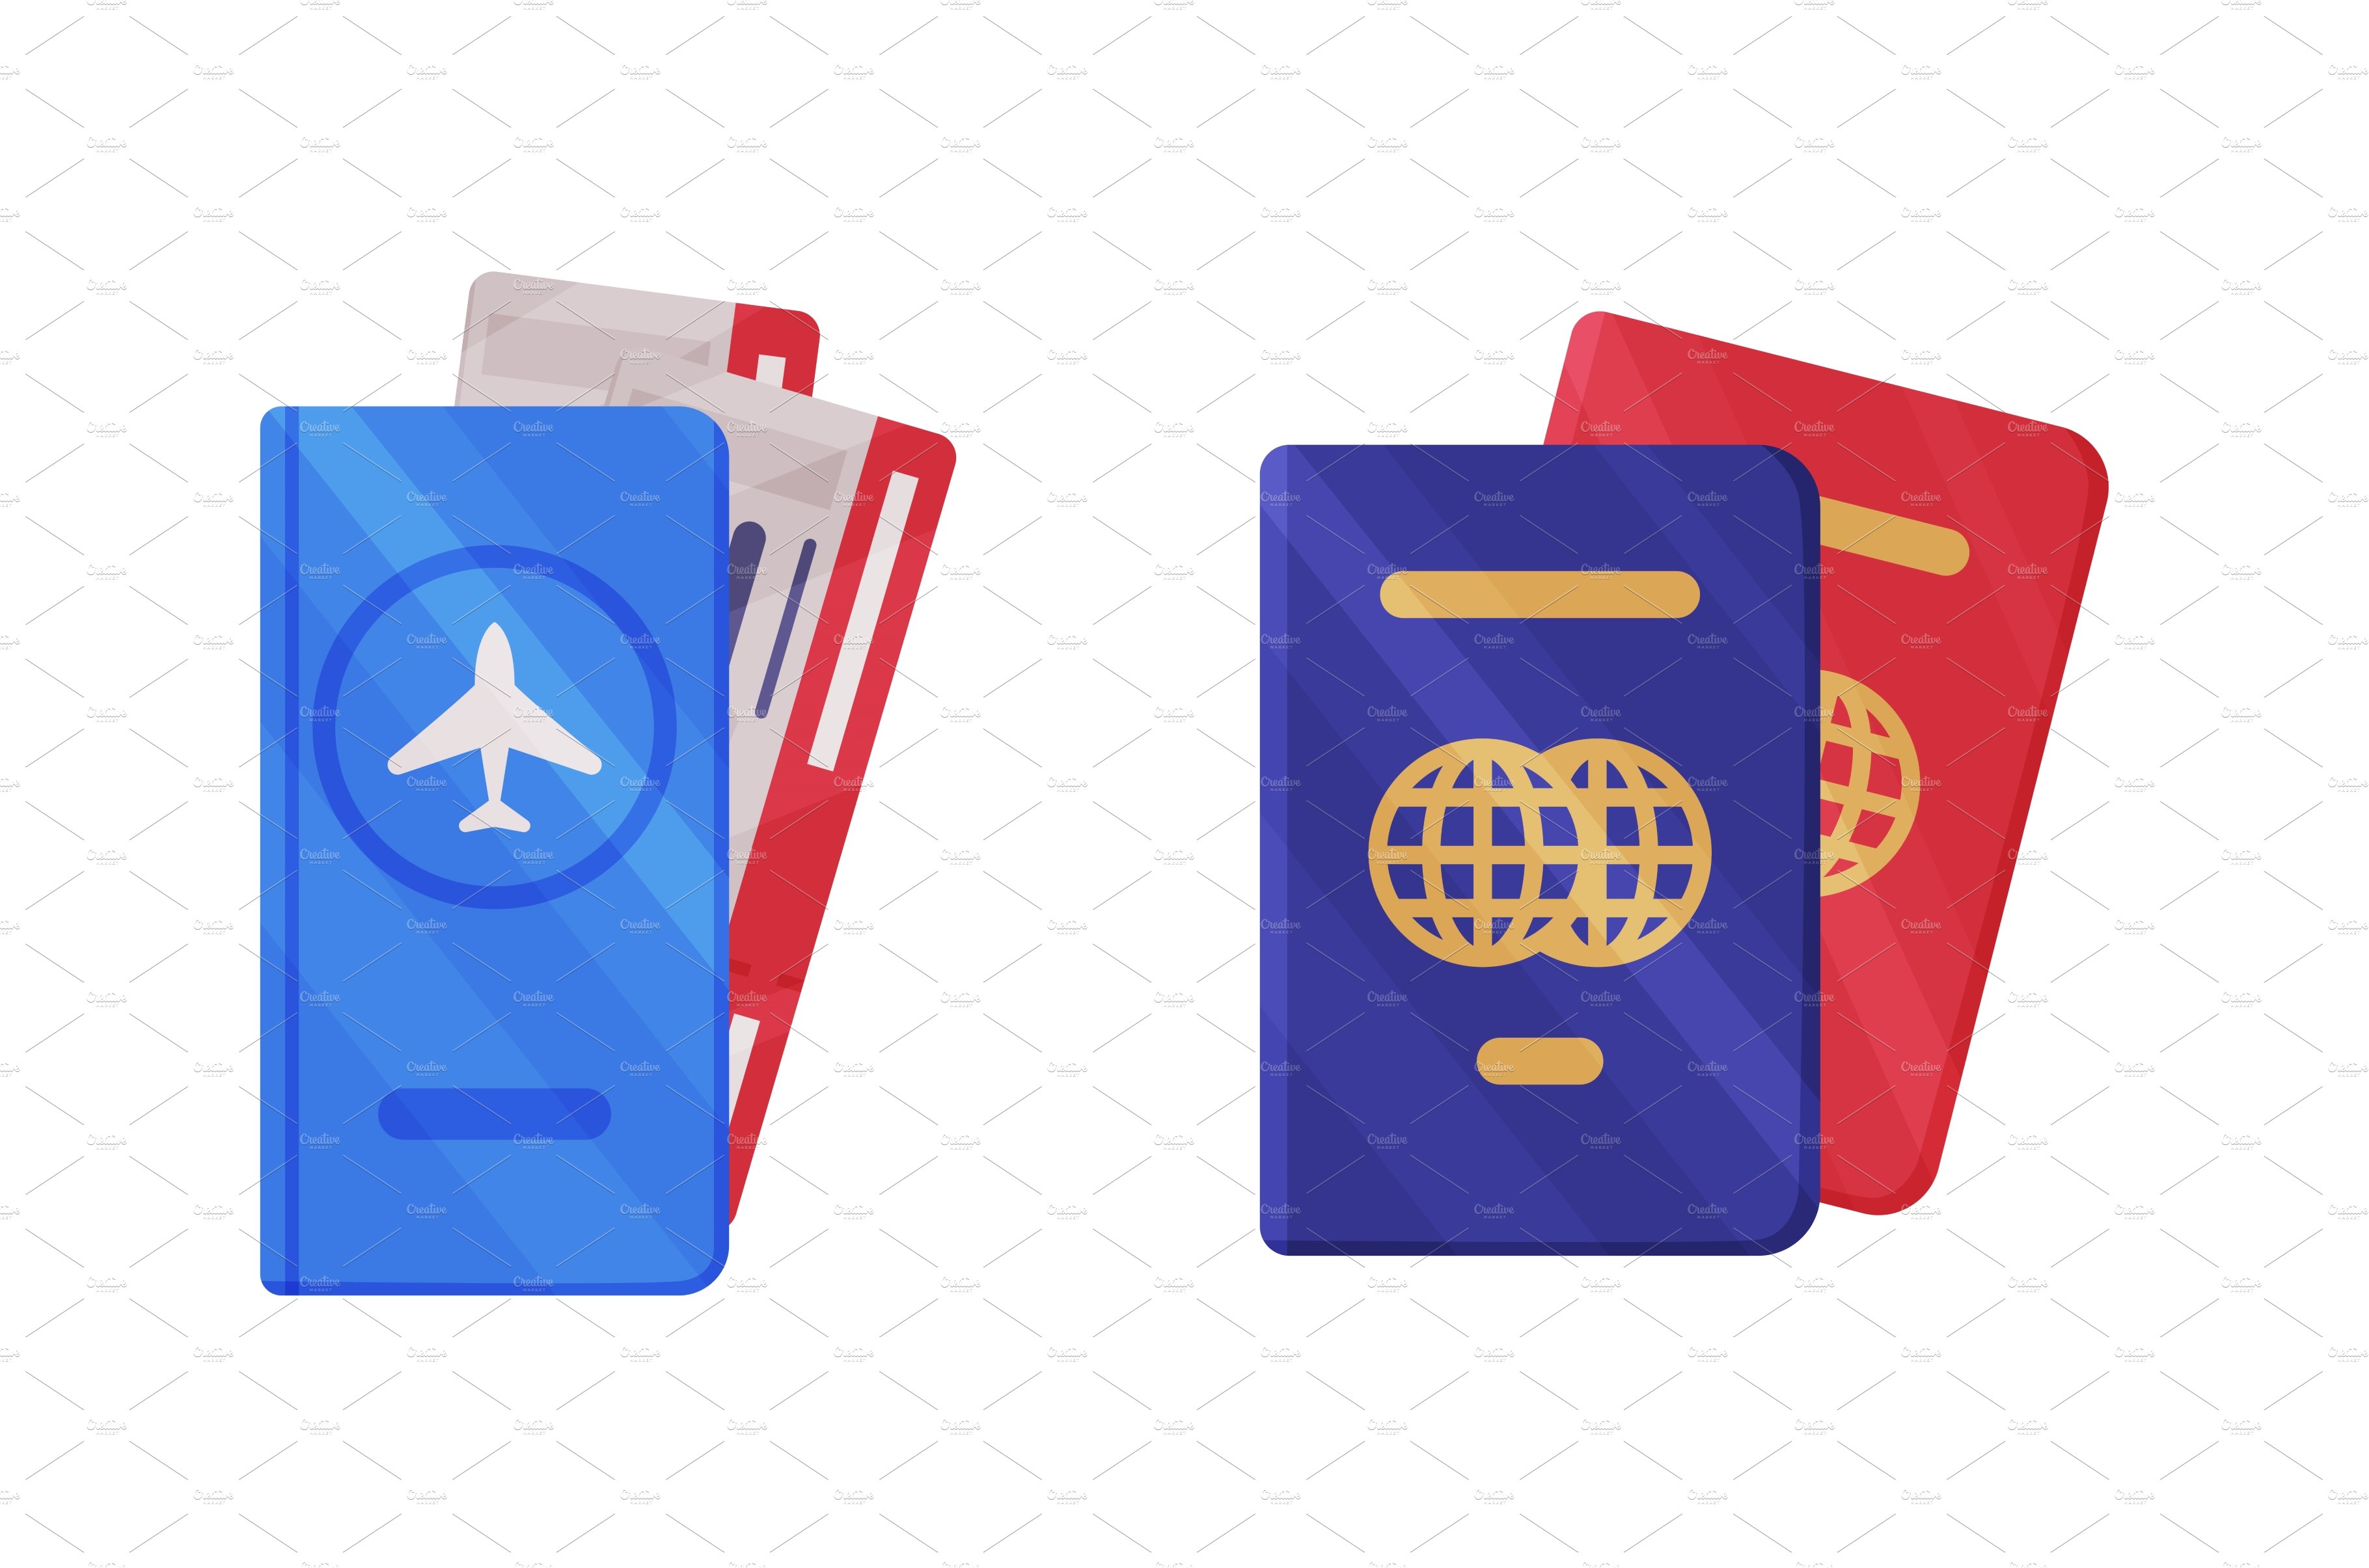 Boarding Tickets and Passport as cover image.